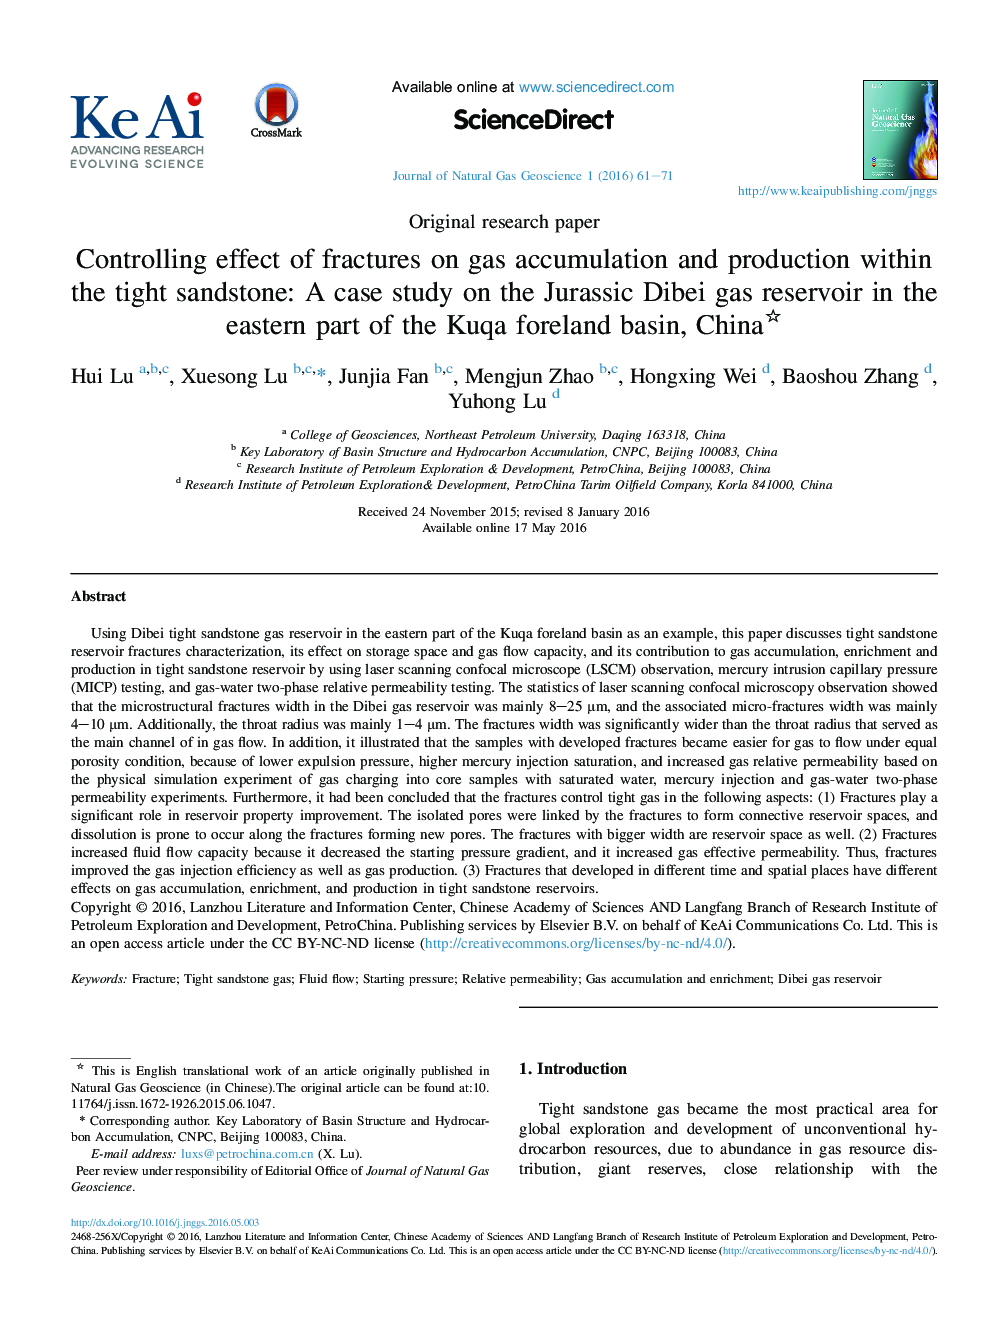 Controlling effect of fractures on gas accumulation and production within the tight sandstone: A case study on the Jurassic Dibei gas reservoir in the eastern part of the Kuqa foreland basin, China 